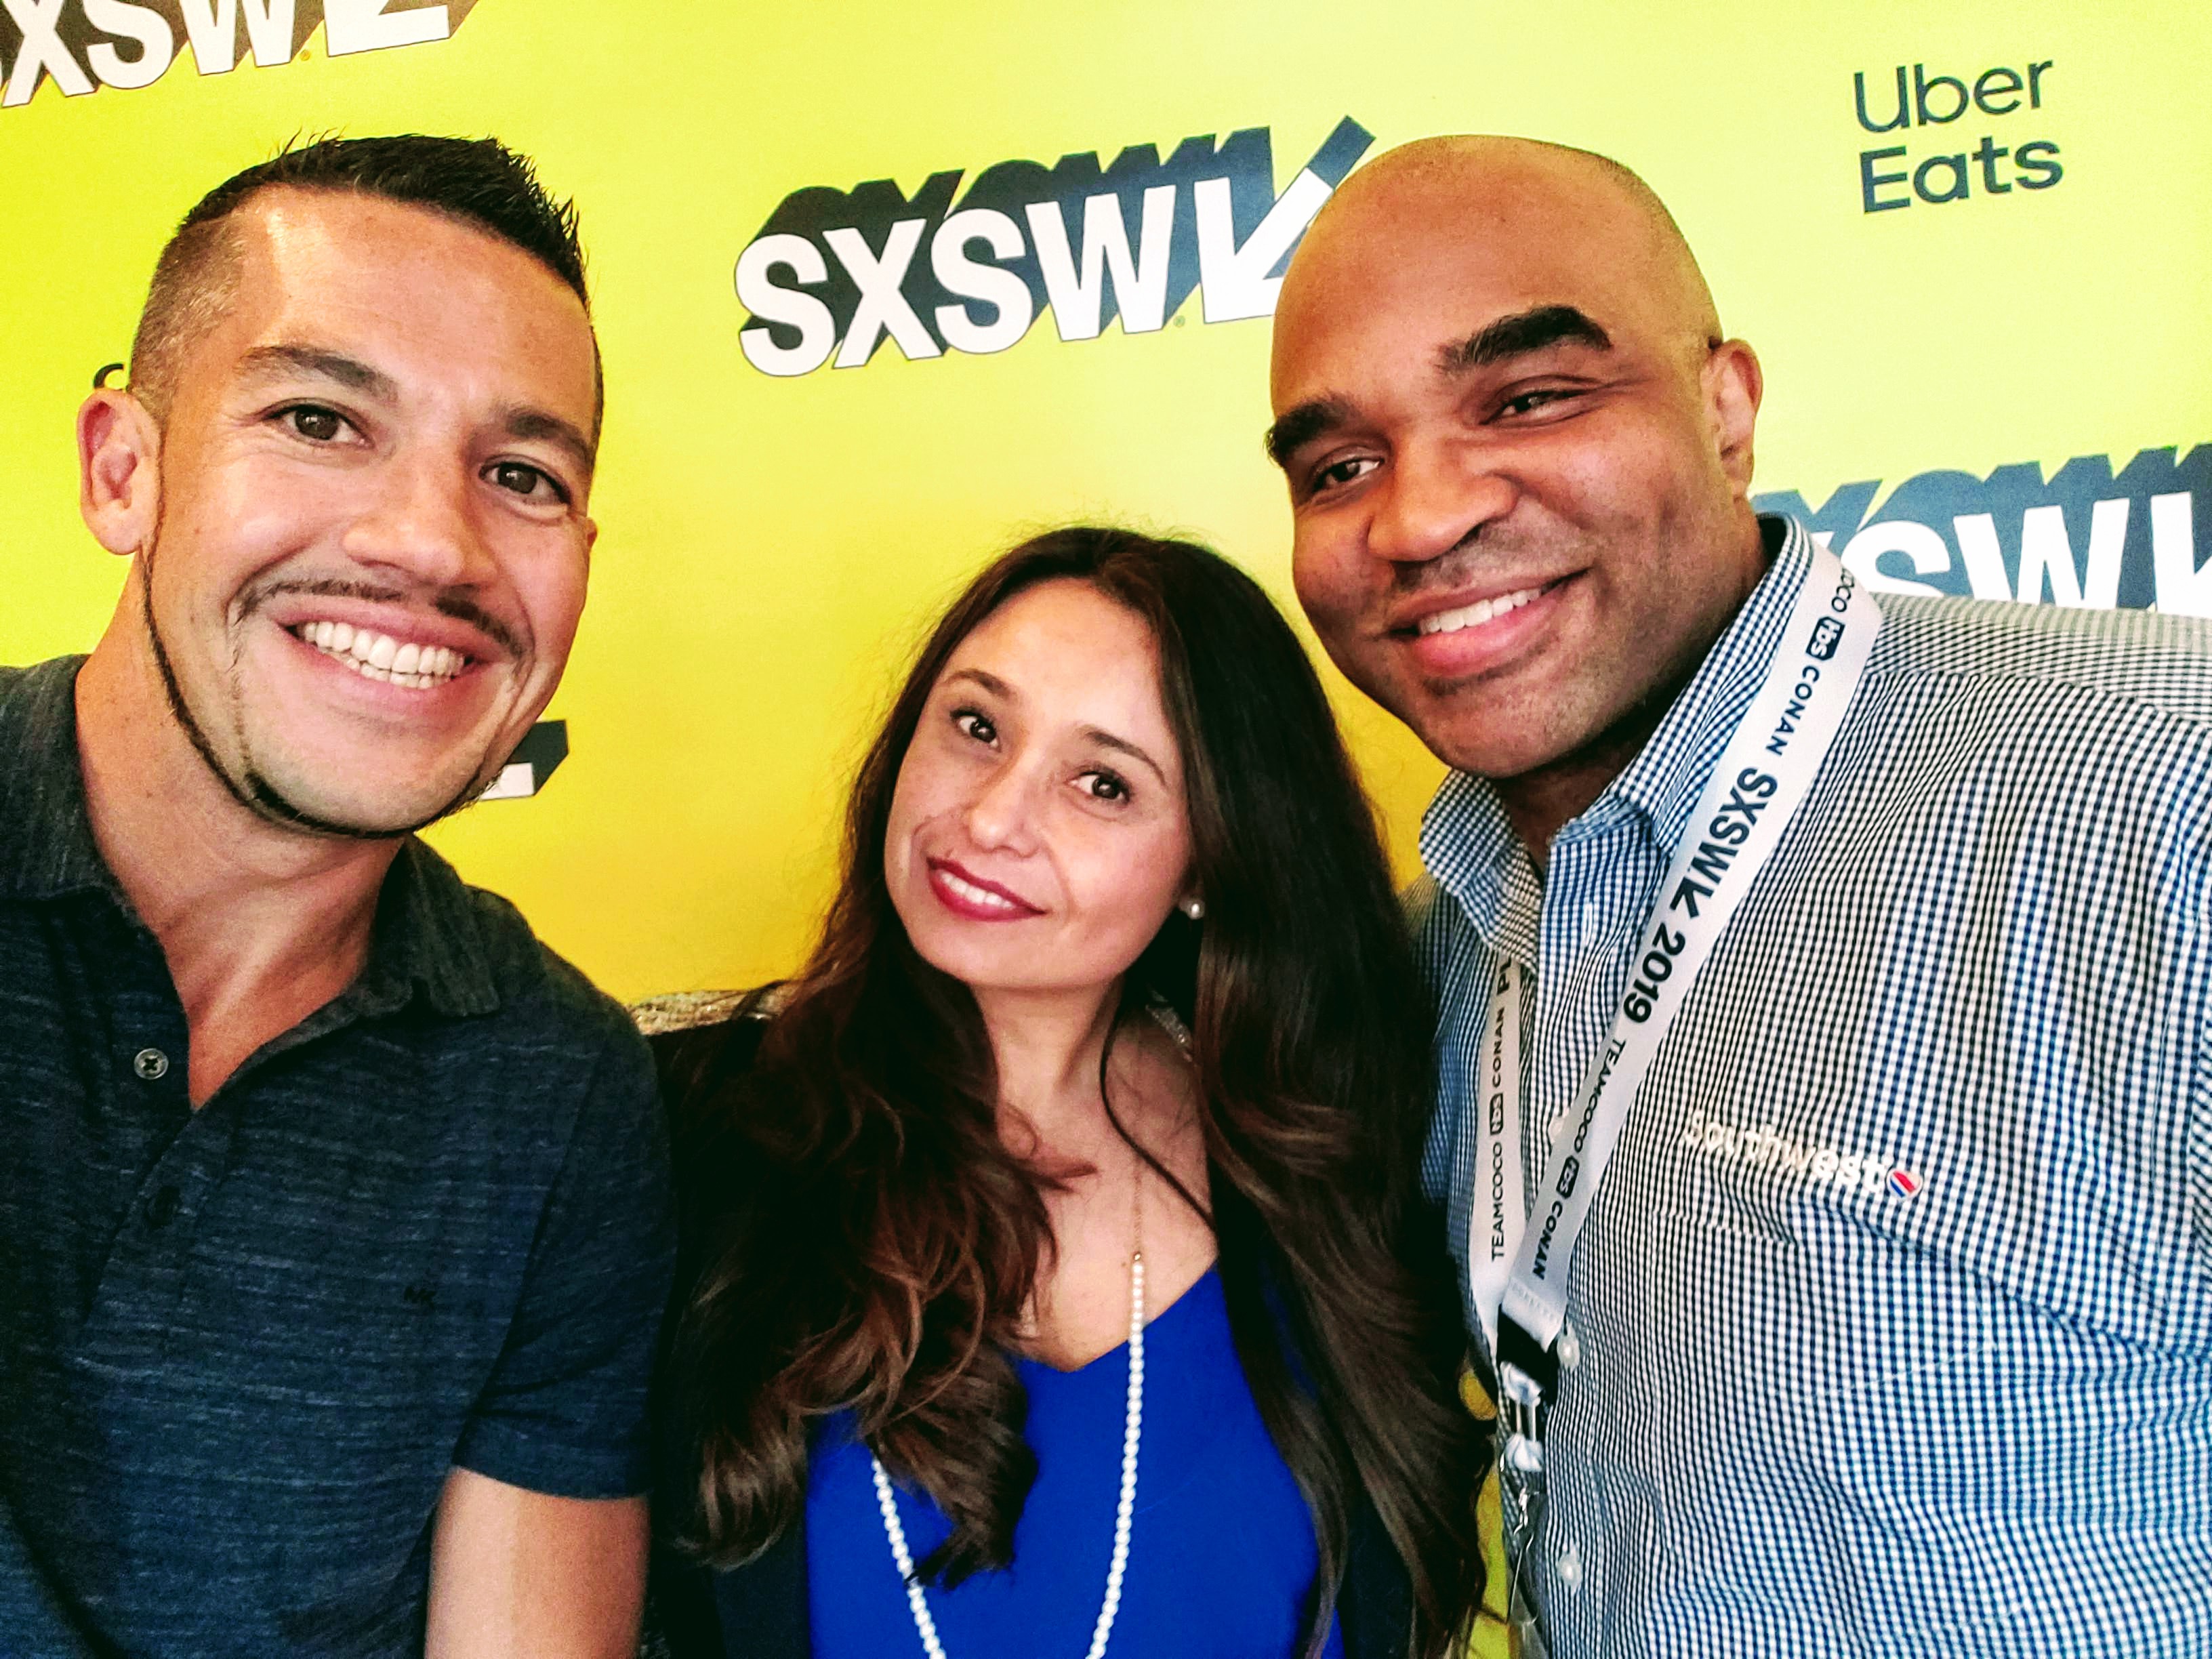 Co-Founder’s Top 5 Highlights from SXSW 2019